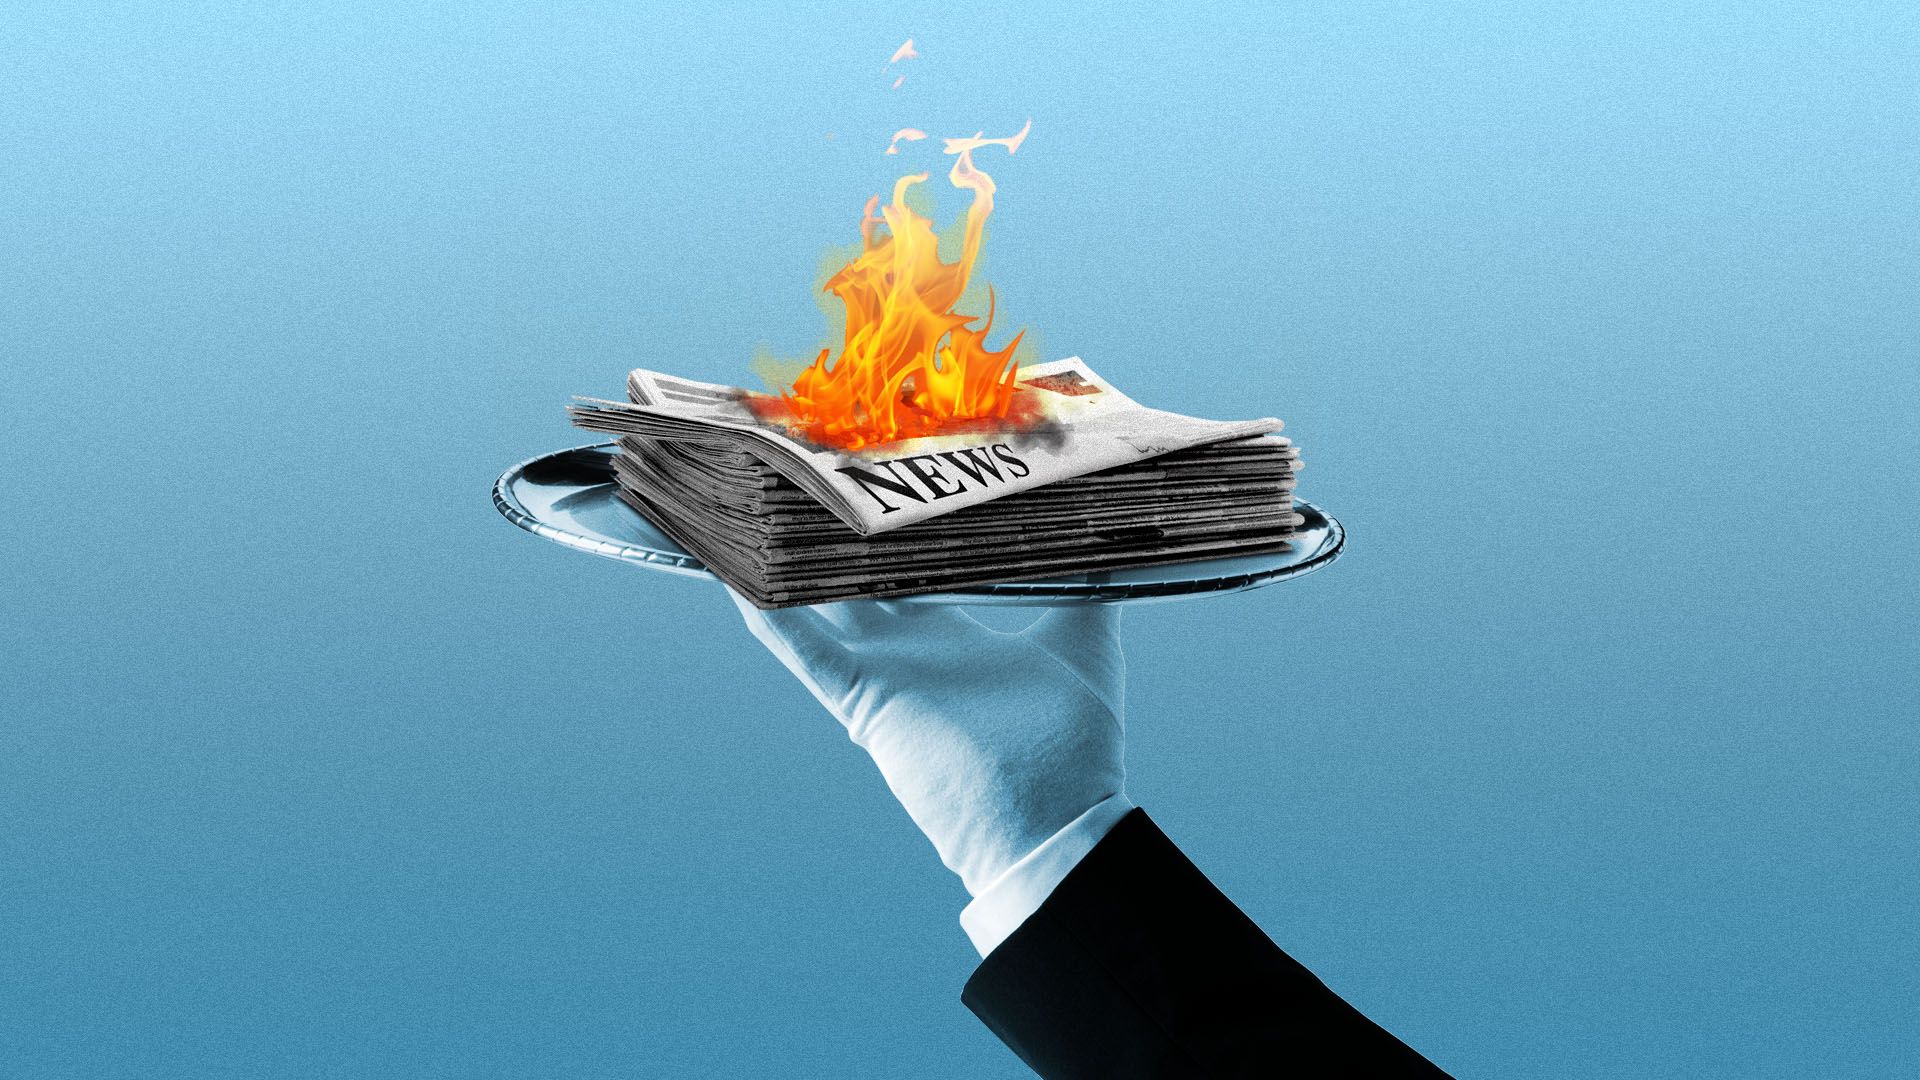 Illustration of a butler holding a silver platter with a newspaper on top that's on fire